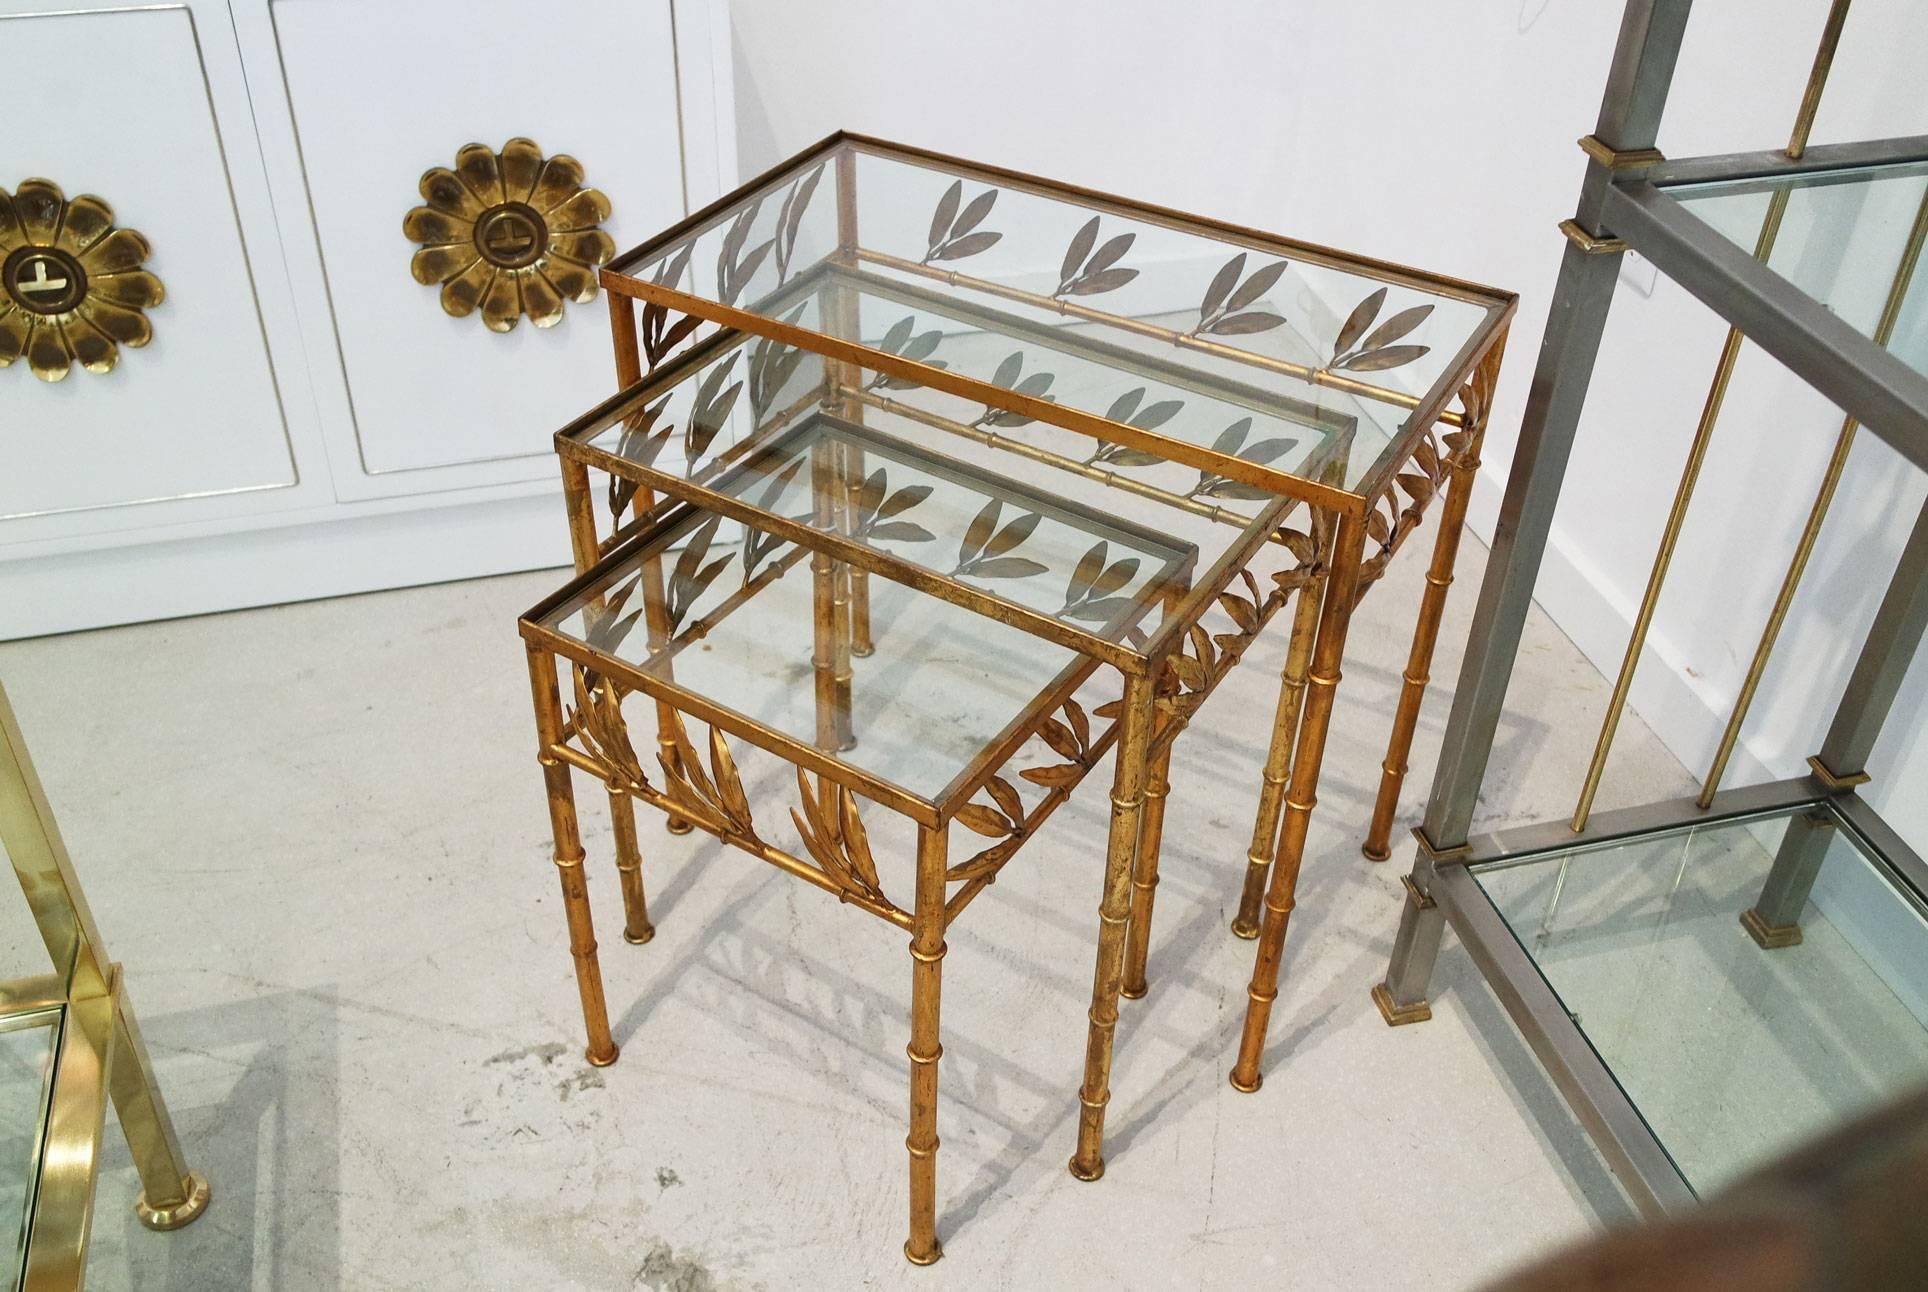 Set of three gilt bamboo Italian nesting tables with glass tops. The trio nestle into each other.
Two sets available, sold separately.